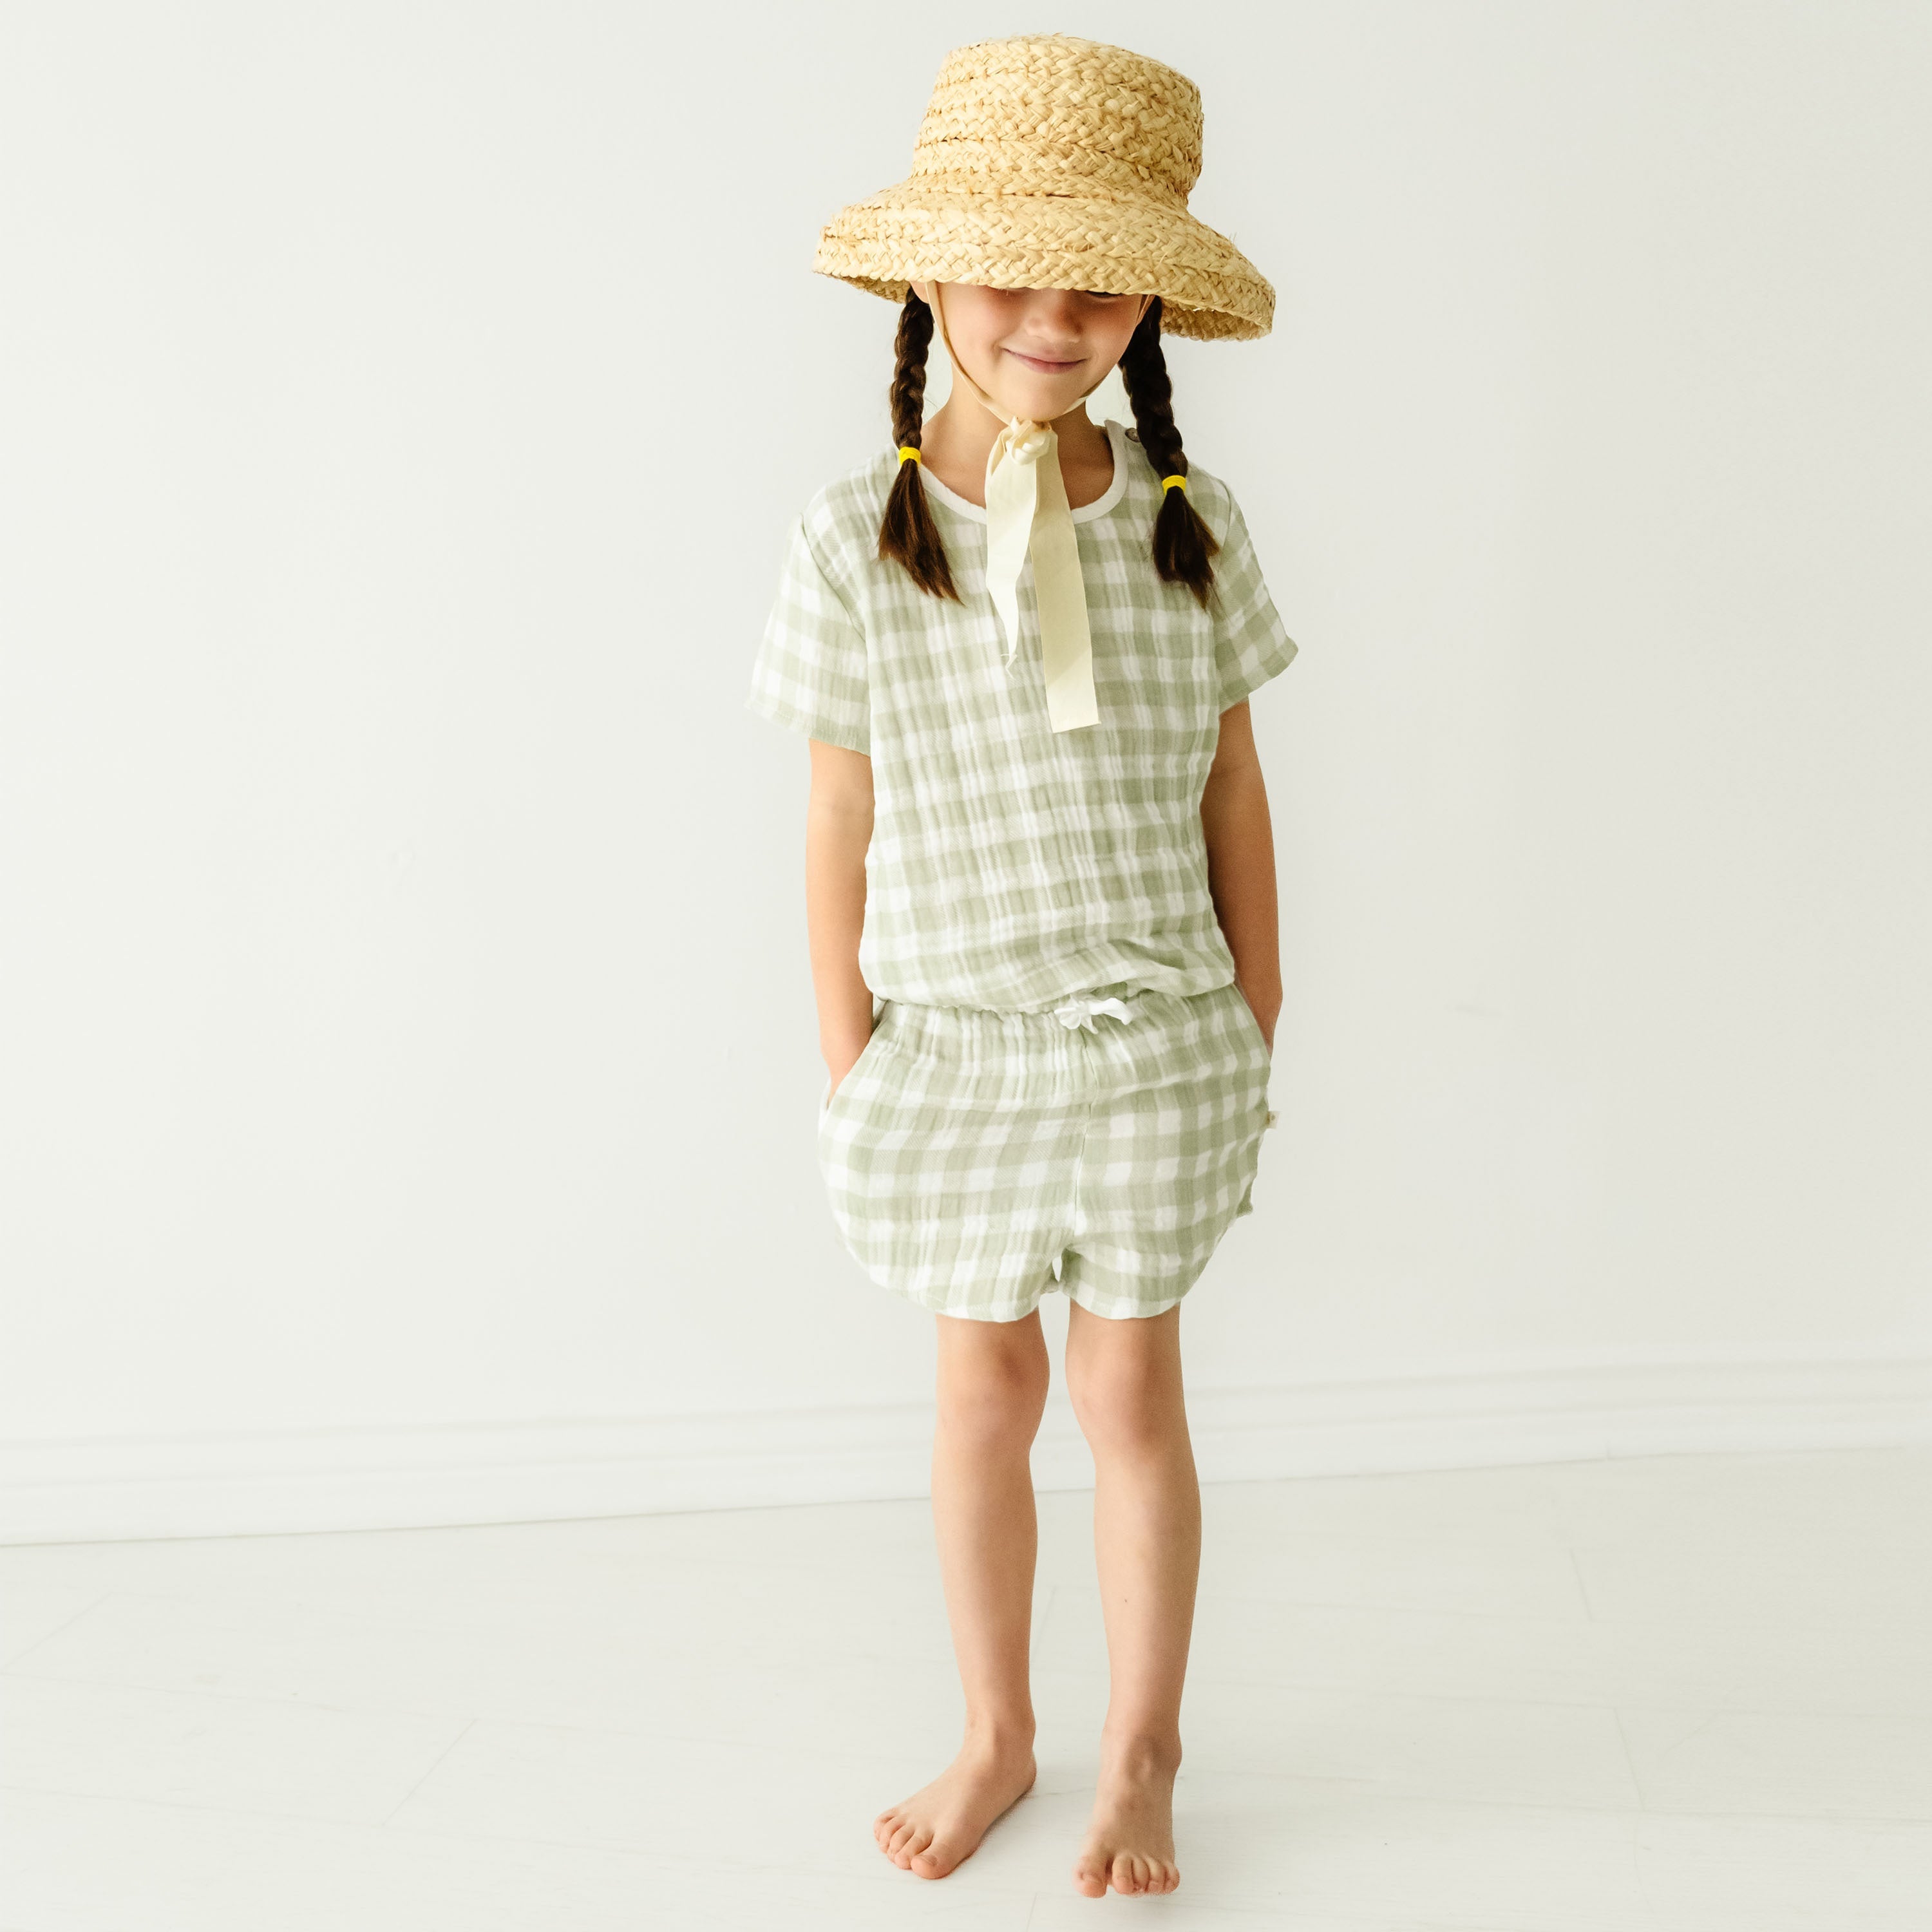 A young girl stands barefoot in a light-filled room, wearing a breezy Makemake Organics gingham dress and a wide-brimmed straw hat covering her face. Her braided hair is visible under the hat.